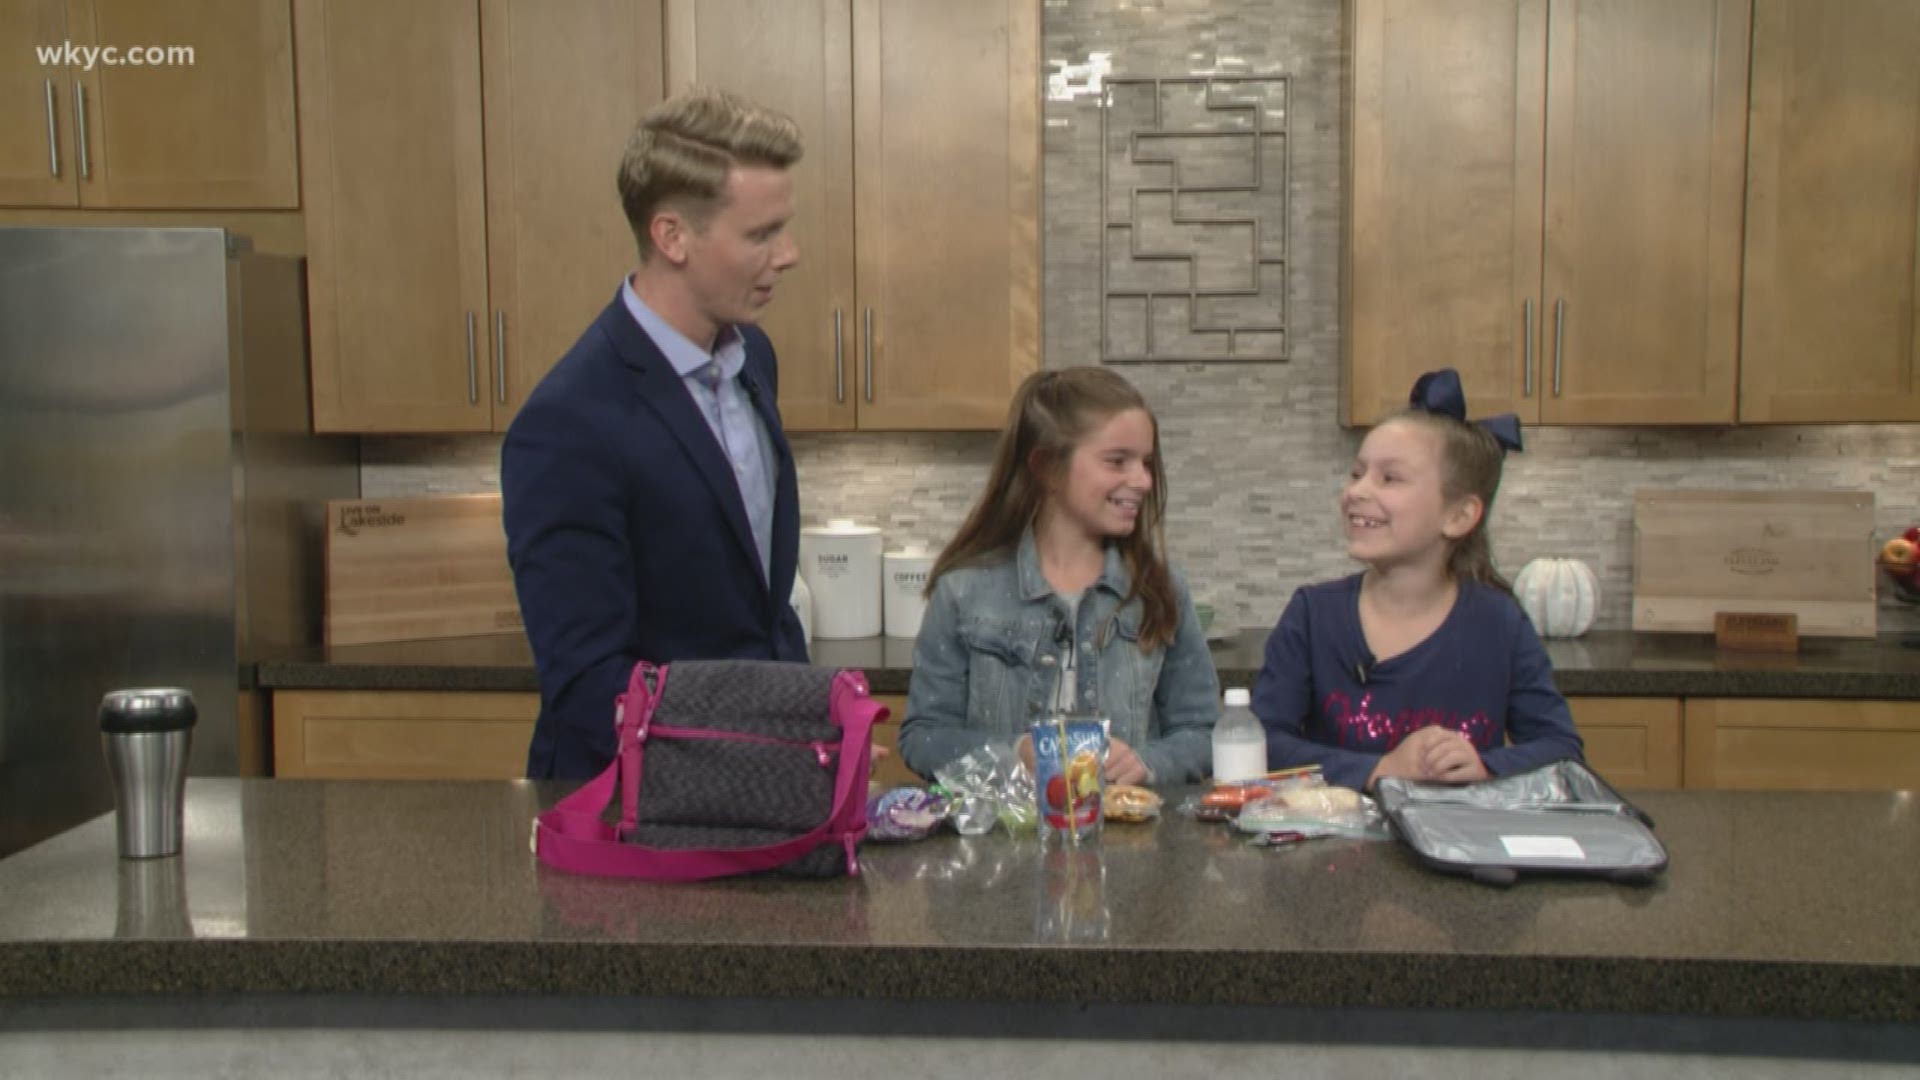 Oct. 11, 2019: When it comes to packing a lunch for school, we brought in Dave Chudowsky's daughters to reveal their tips for the best things kids should pack.